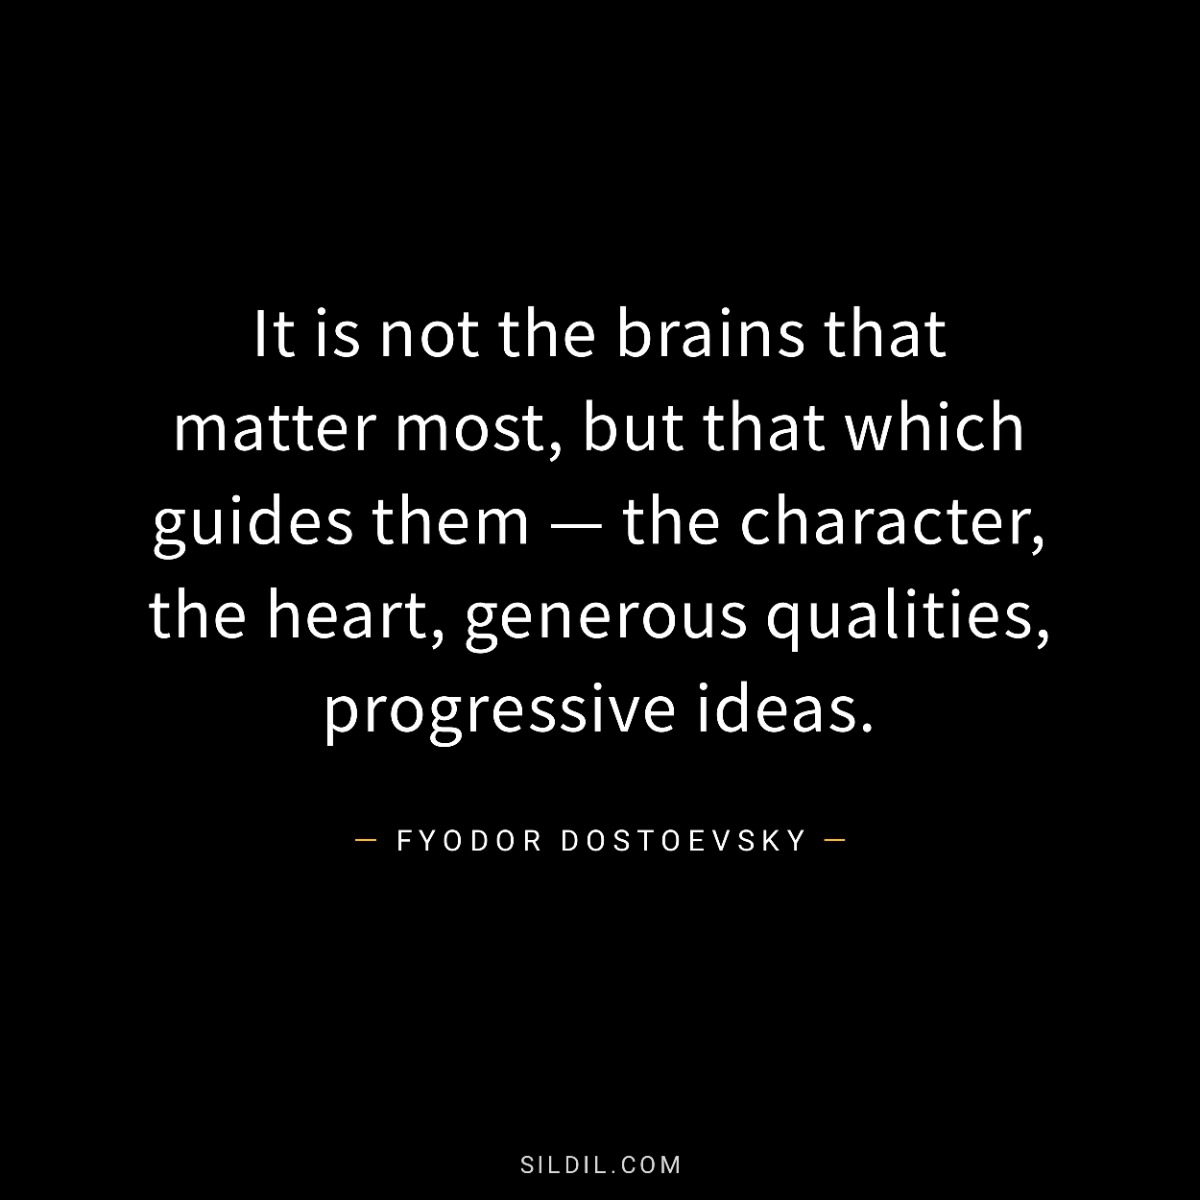 It is not the brains that matter most, but that which guides them — the character, the heart, generous qualities, progressive ideas.